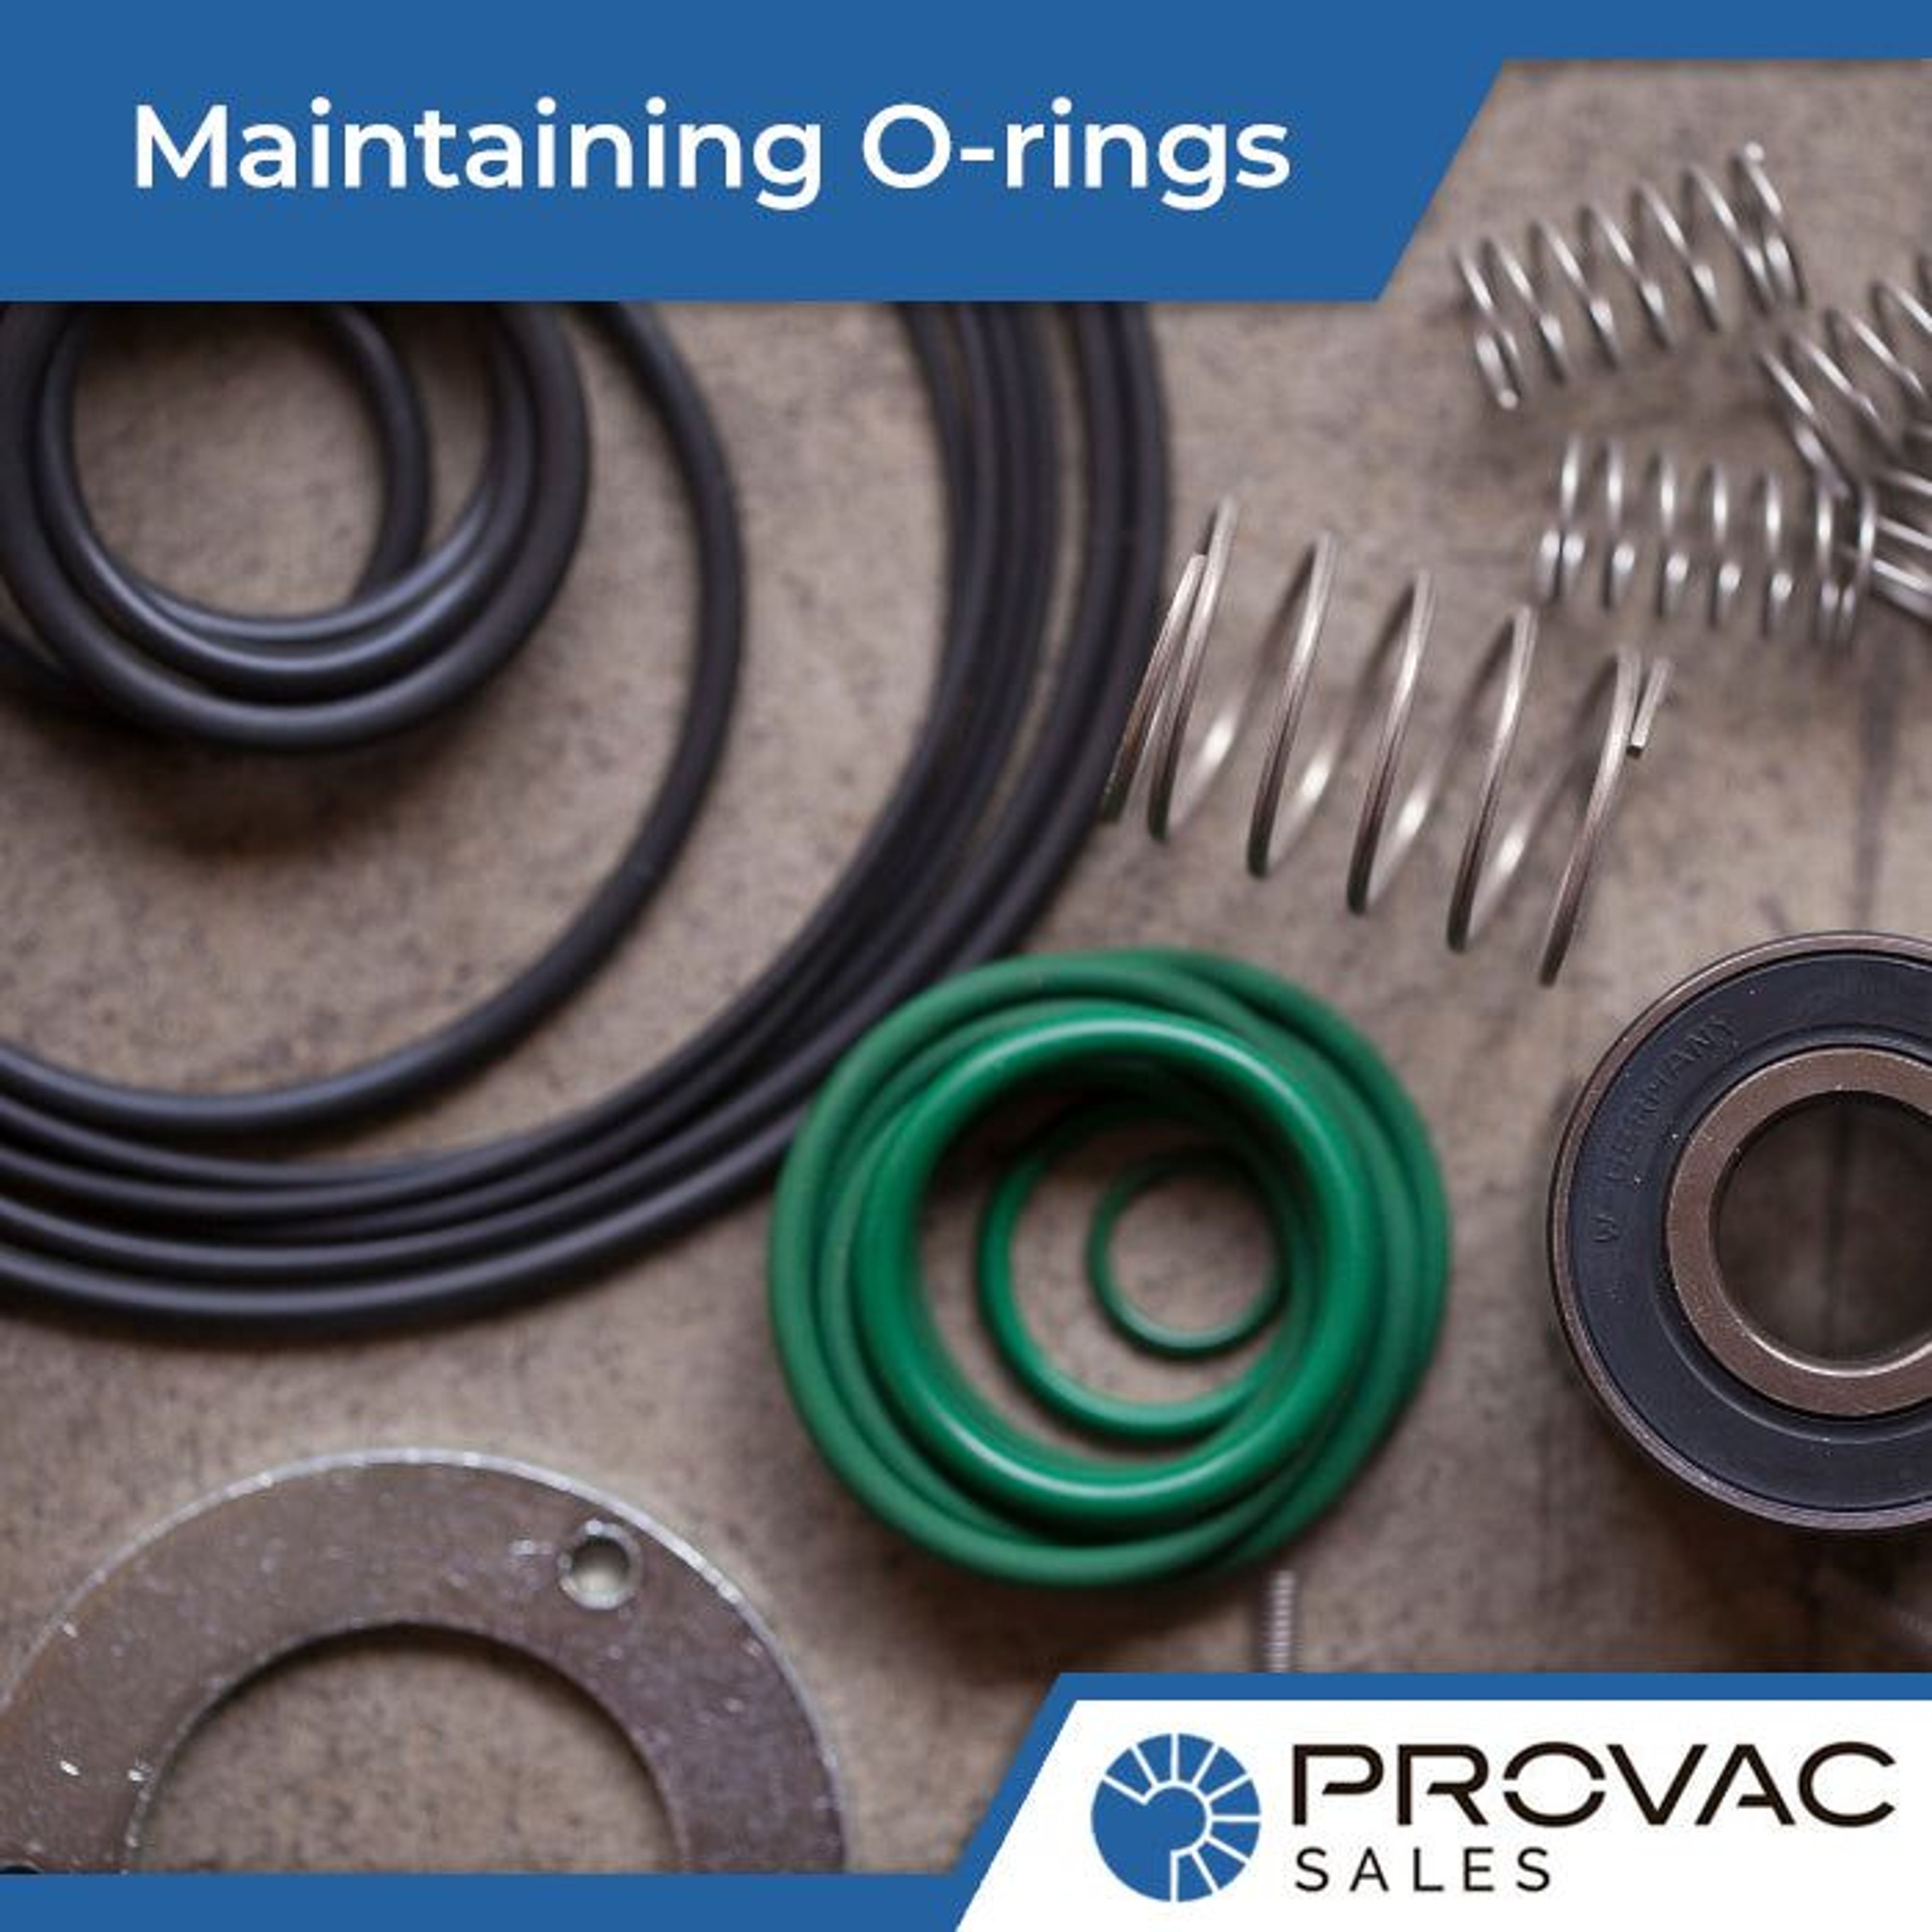 How To Maintain O-Rings Background